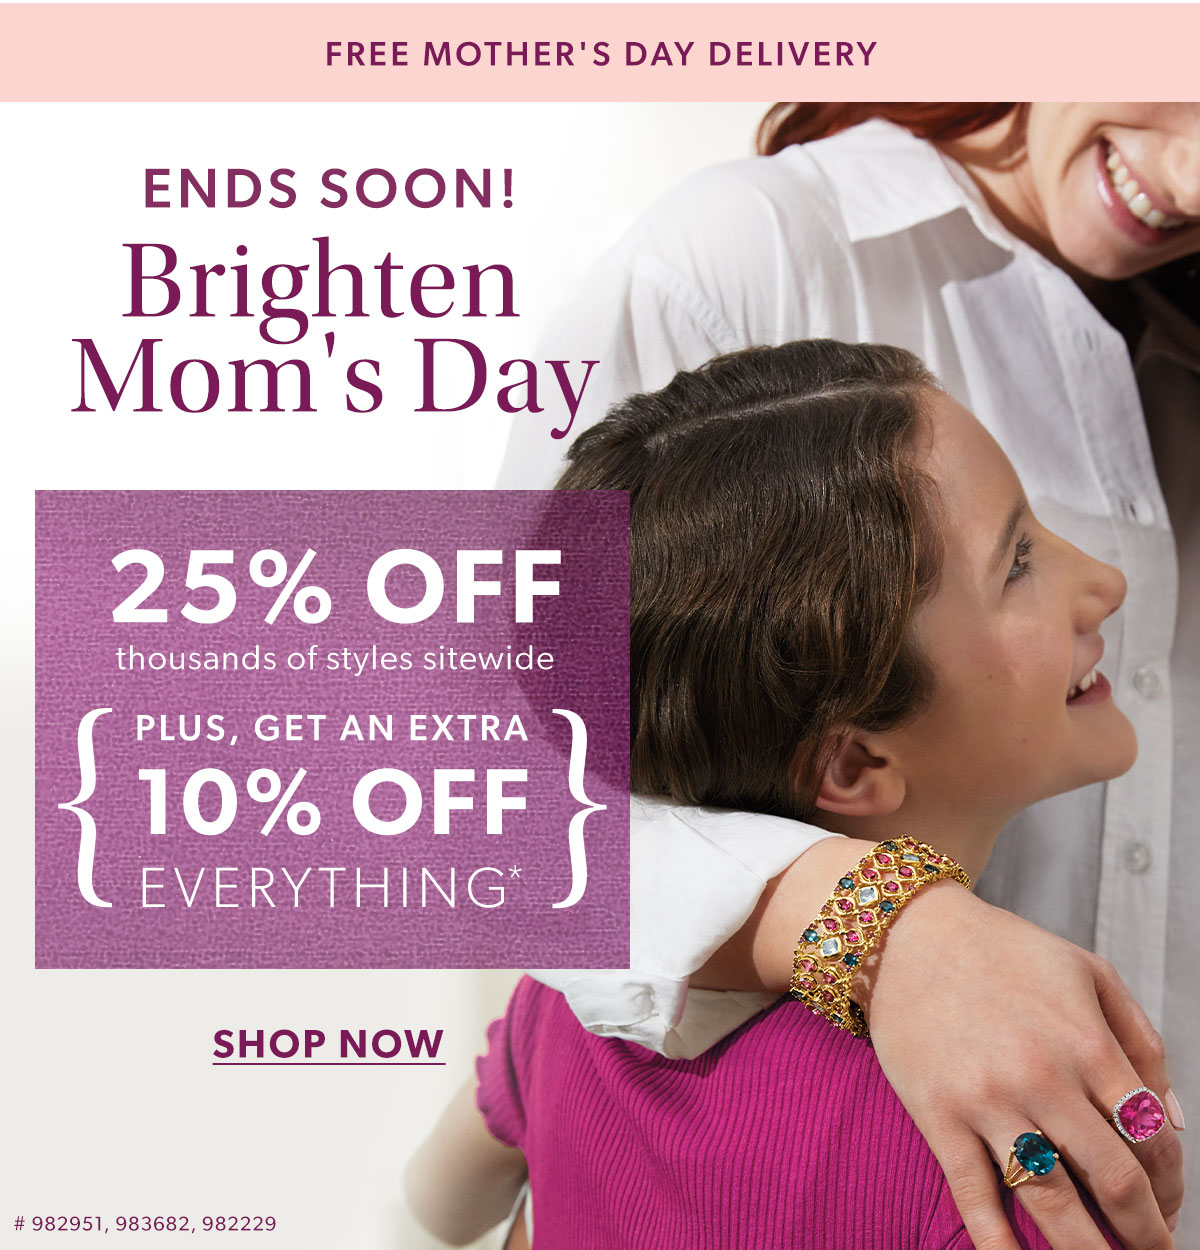 Brighten Mom's Day. 25% Off + Get an Extra 10% Off Everything*